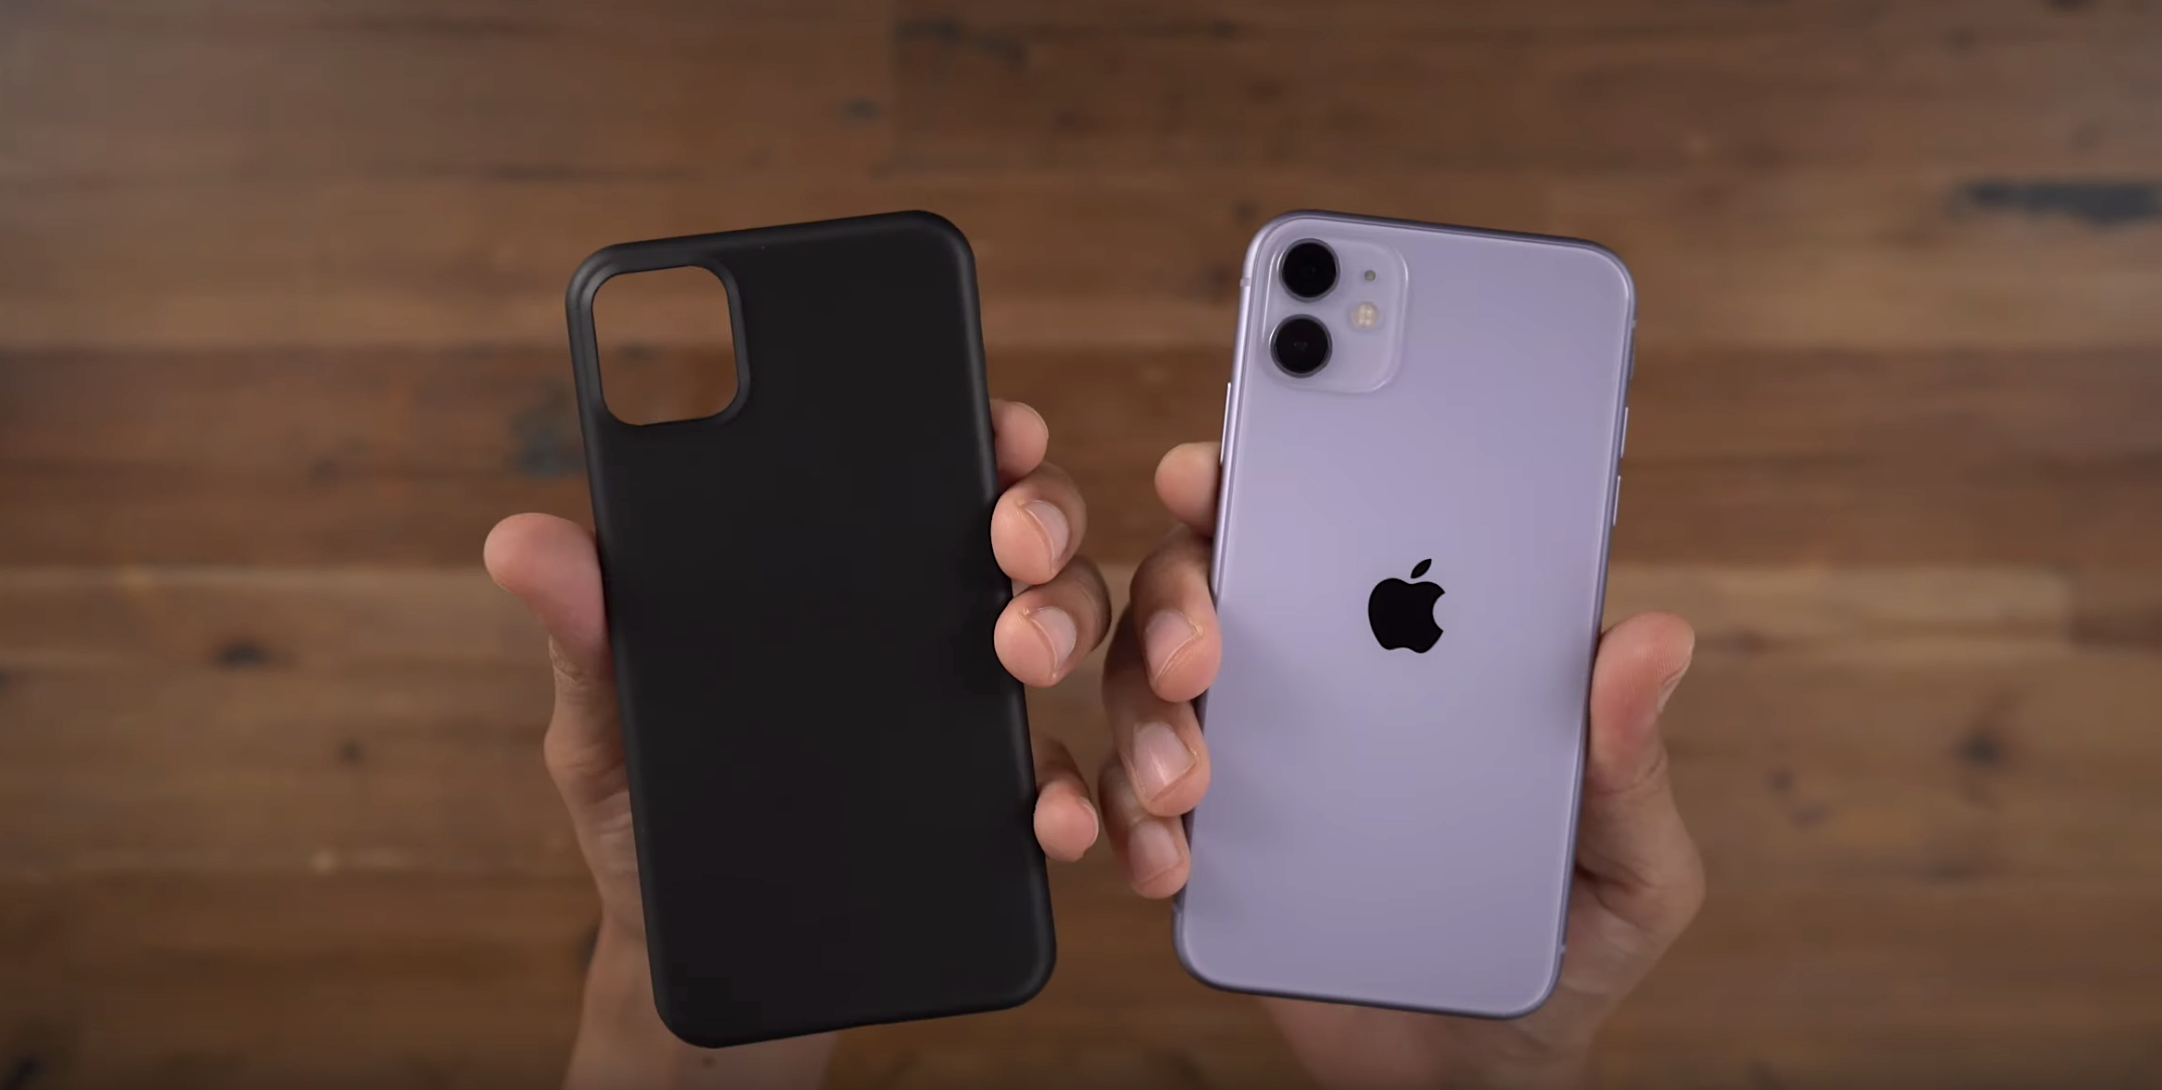 Iphone 11 Pro Case. Iphone 11 Pro on hand. Iphone 14 Pro Max Case hand. Iphone 11 Pro and 11 Case. Айфон 11 про герцы